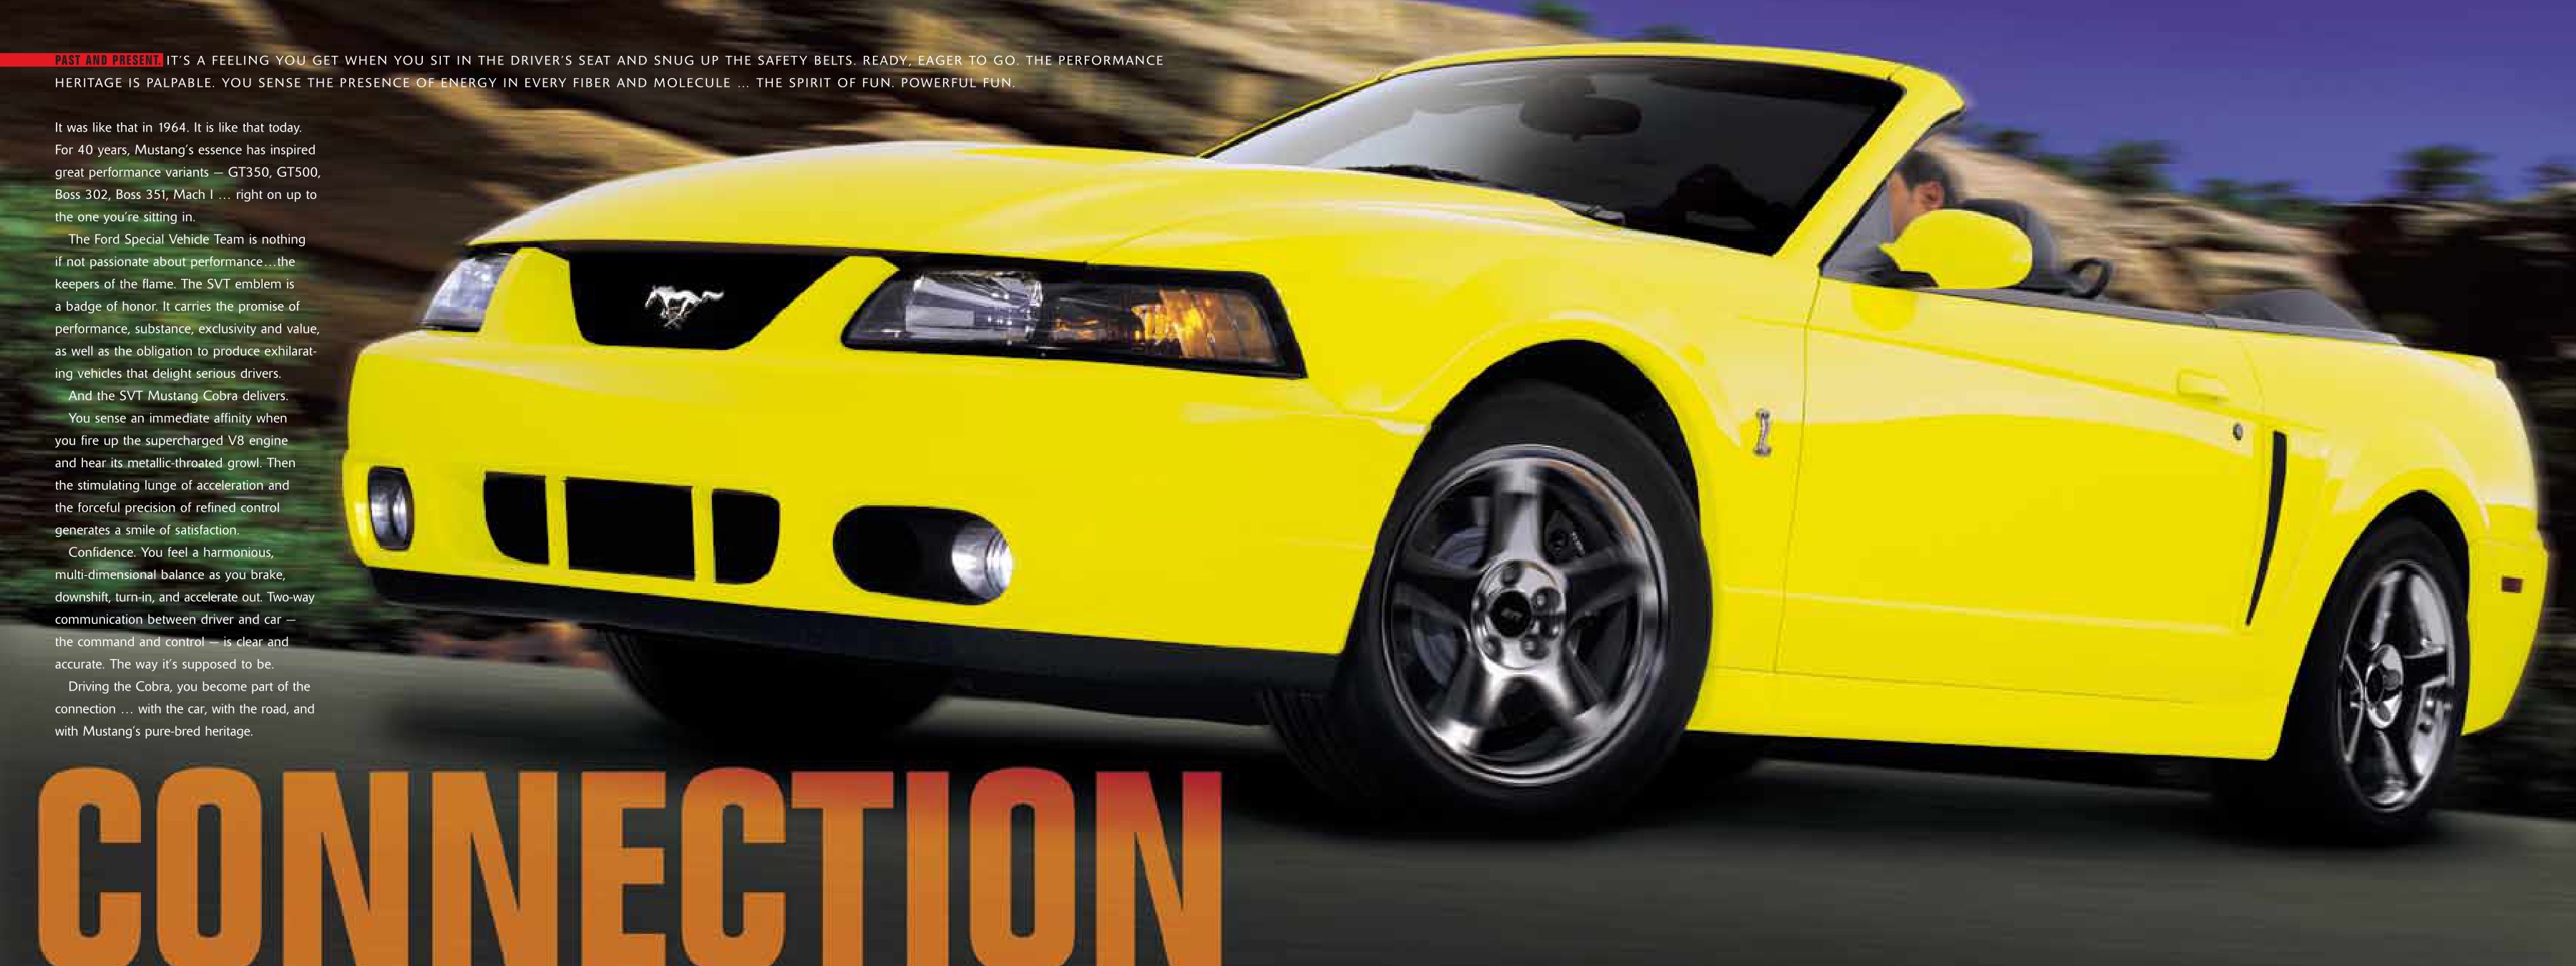 2004 Ford Mustang Cobra Brochure Page 4